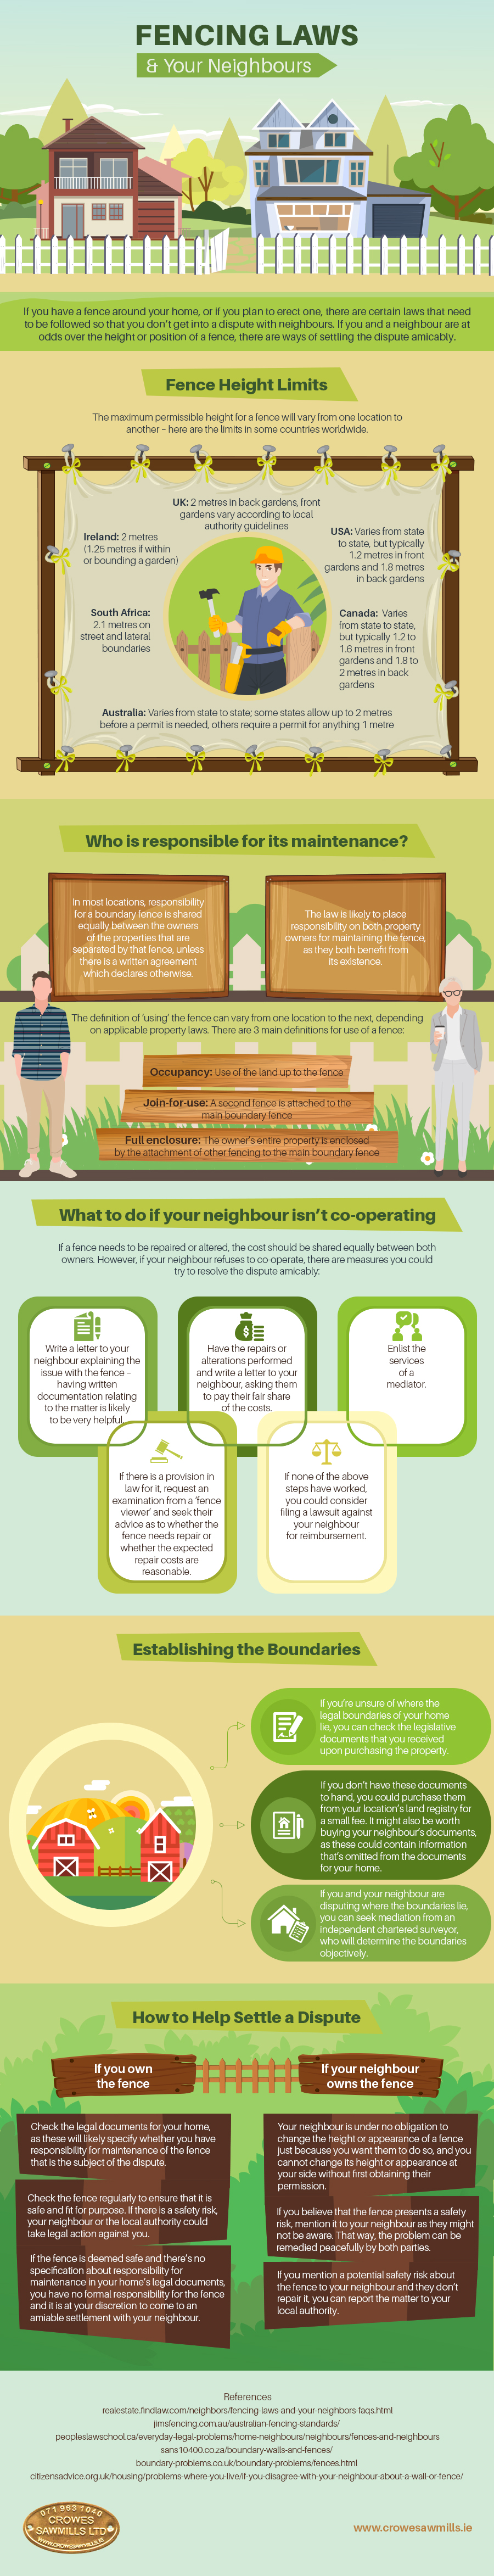 Fencing Laws and Your Neighbours